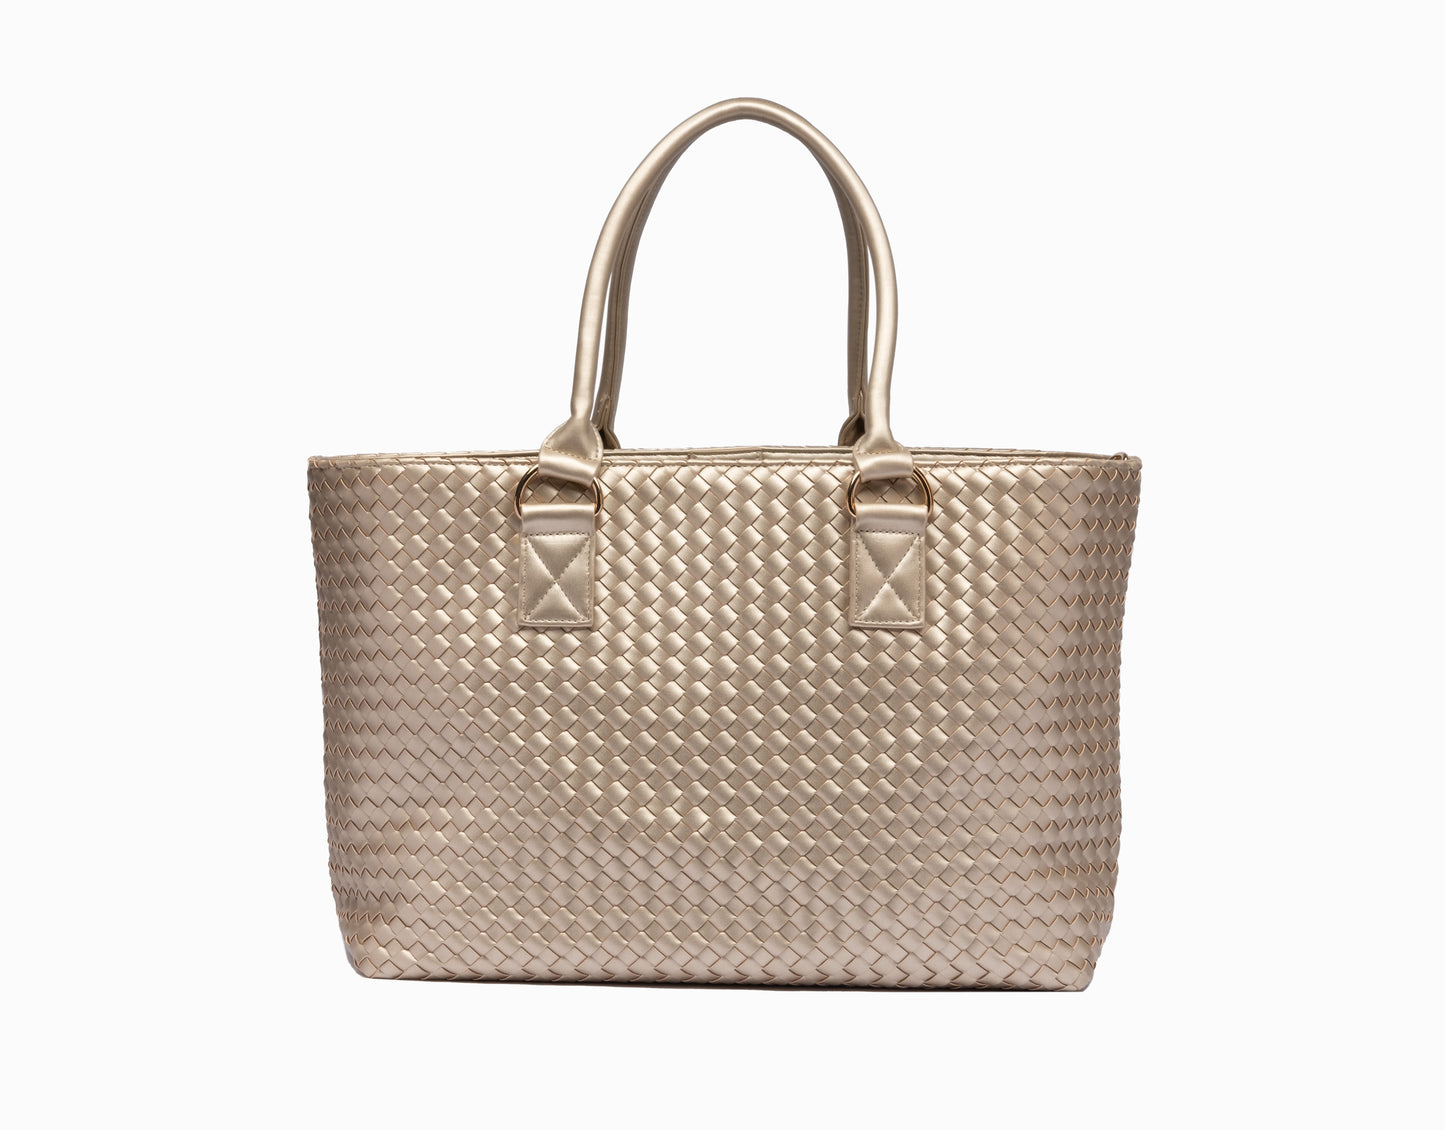 Gold Woven HydroTote- Vegan leather